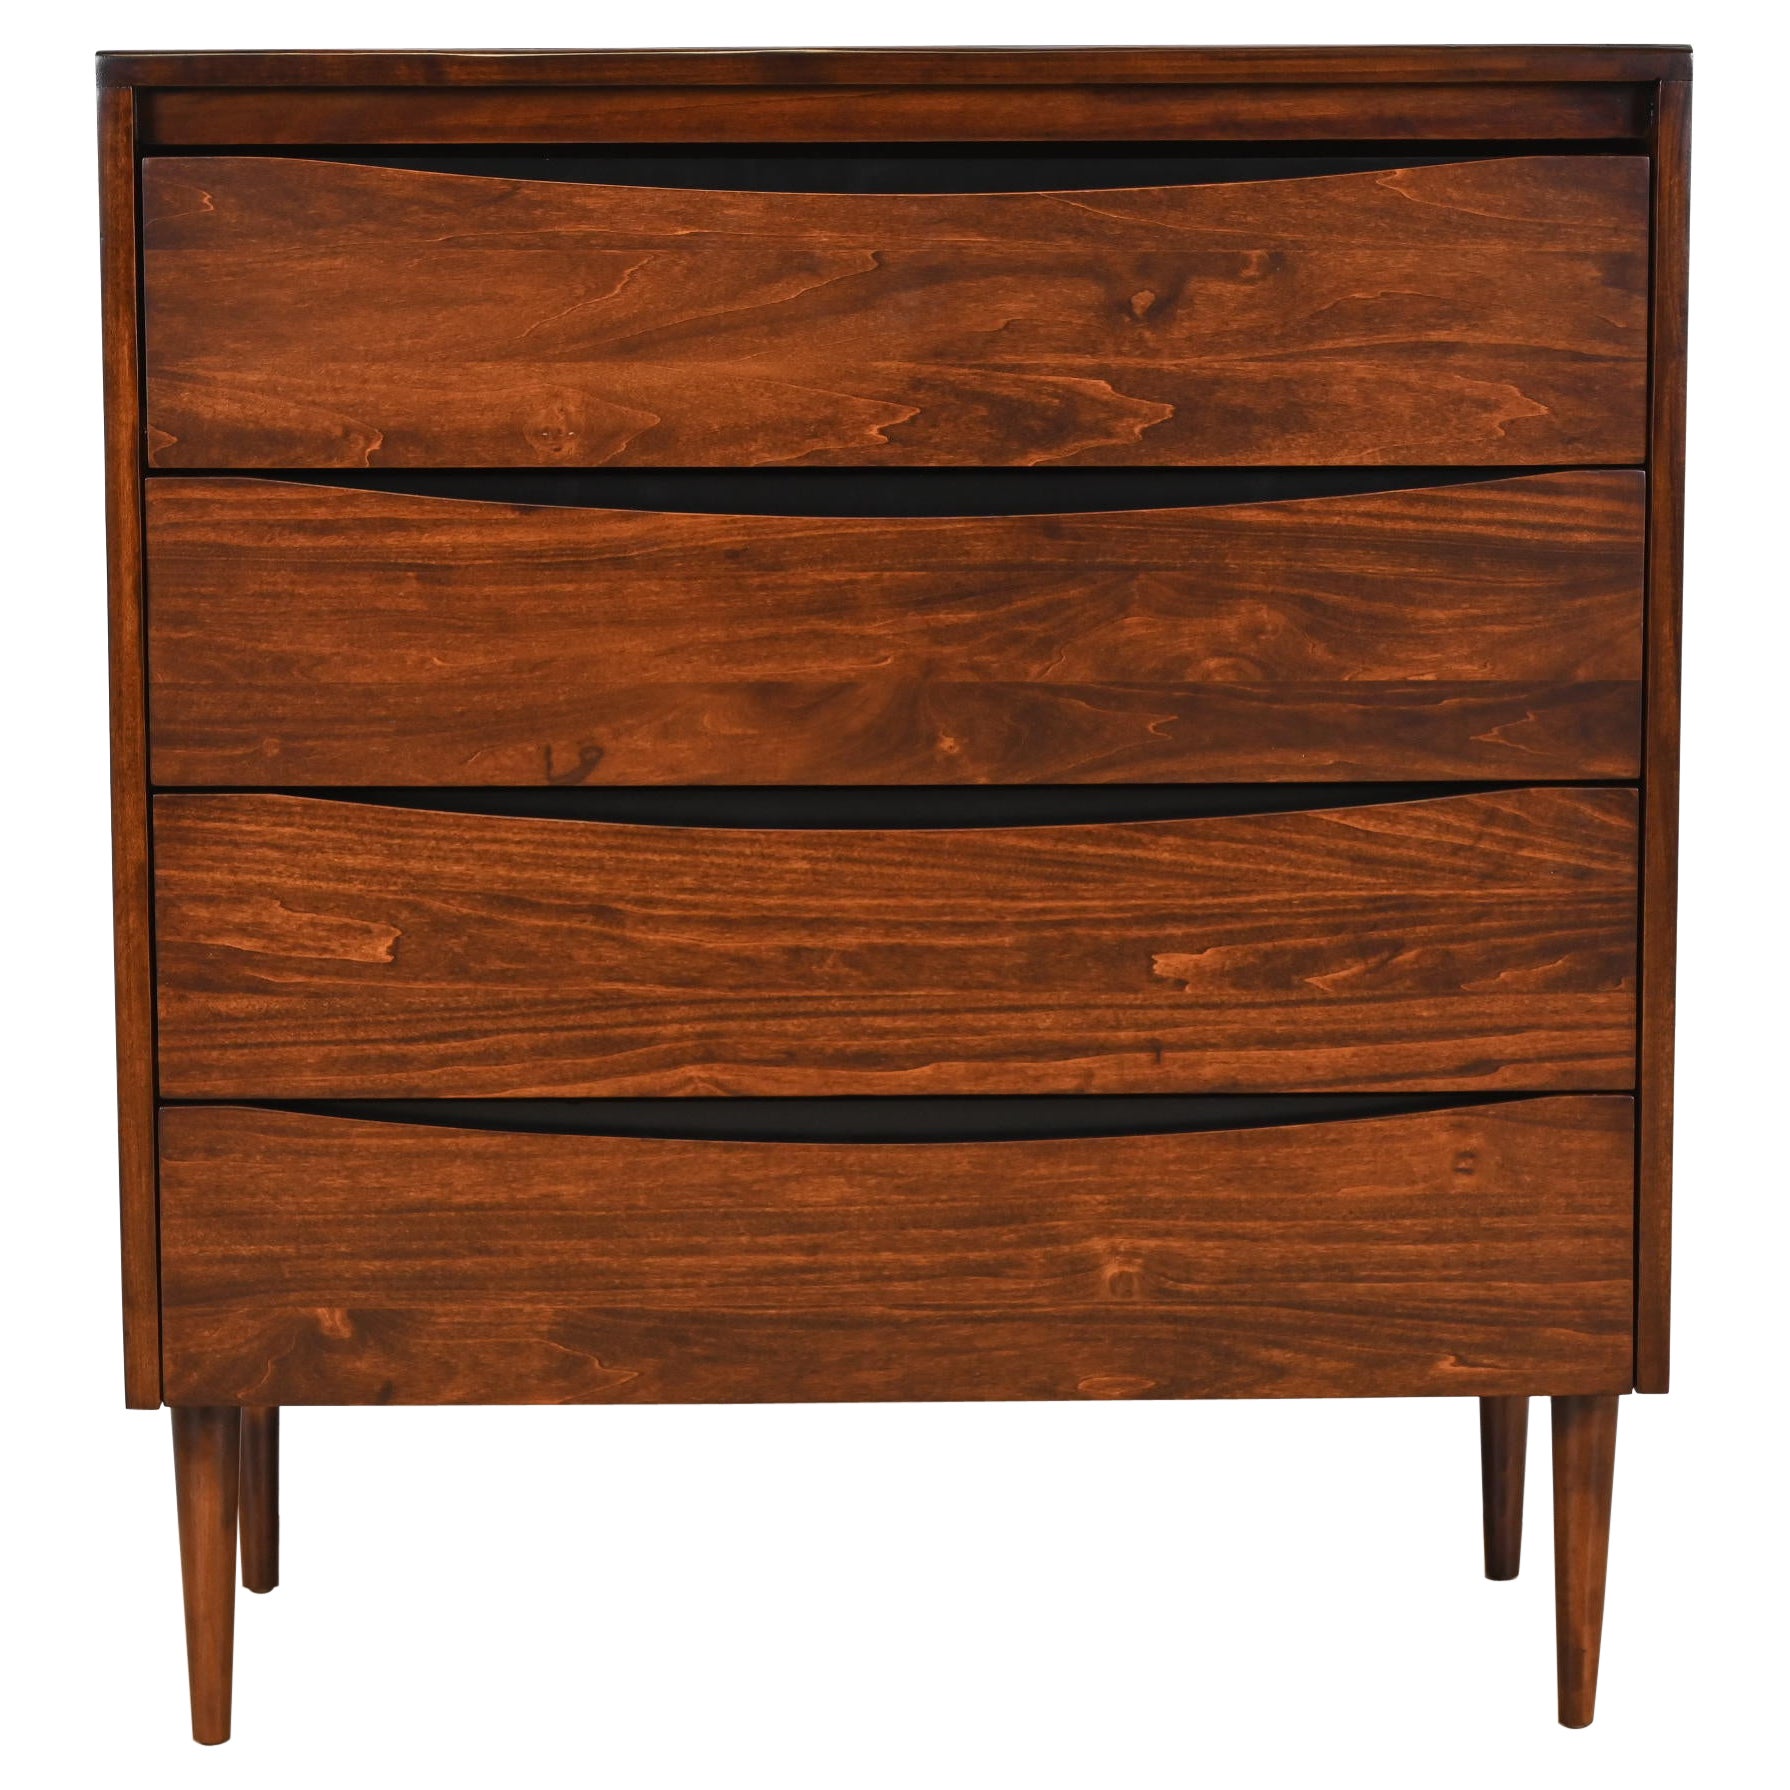 Paul McCobb Mid-Century Modern Birch Chest of Drawers, Newly Refinished